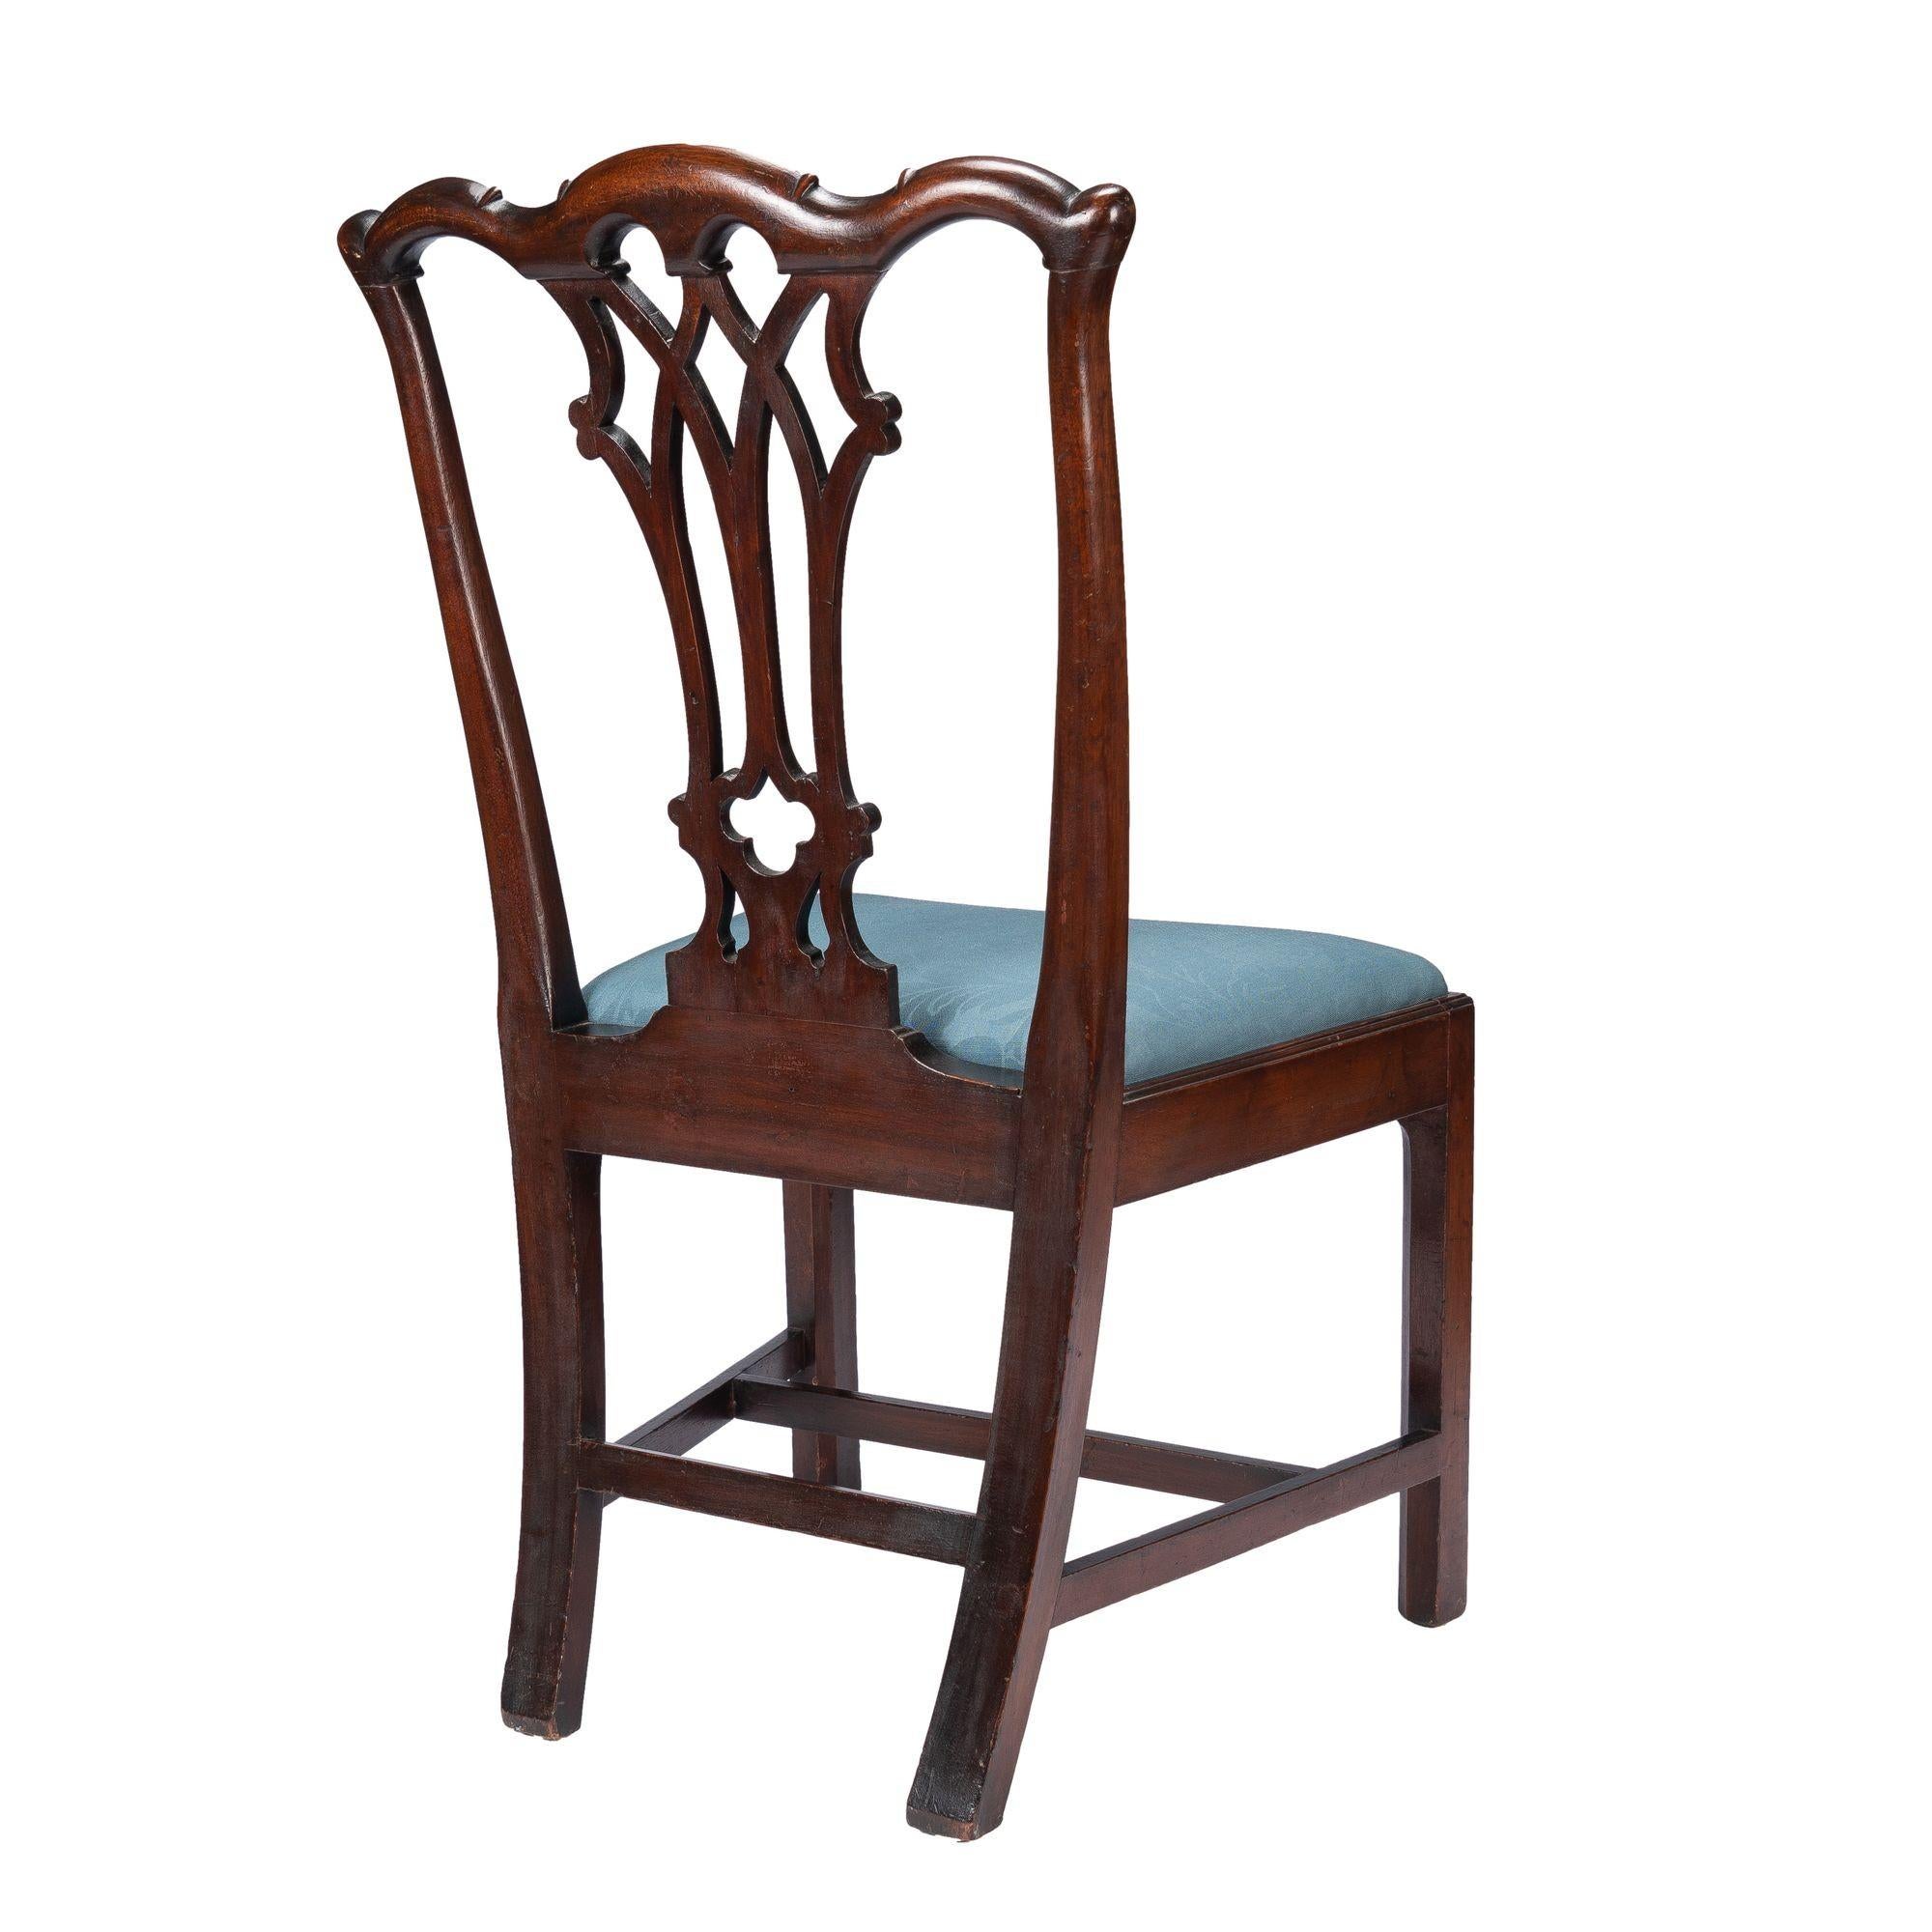 Upholstery Philadelphia Chippendale Mahogany Slip Seat Side Chair by Thomas Tuft, 1770 For Sale